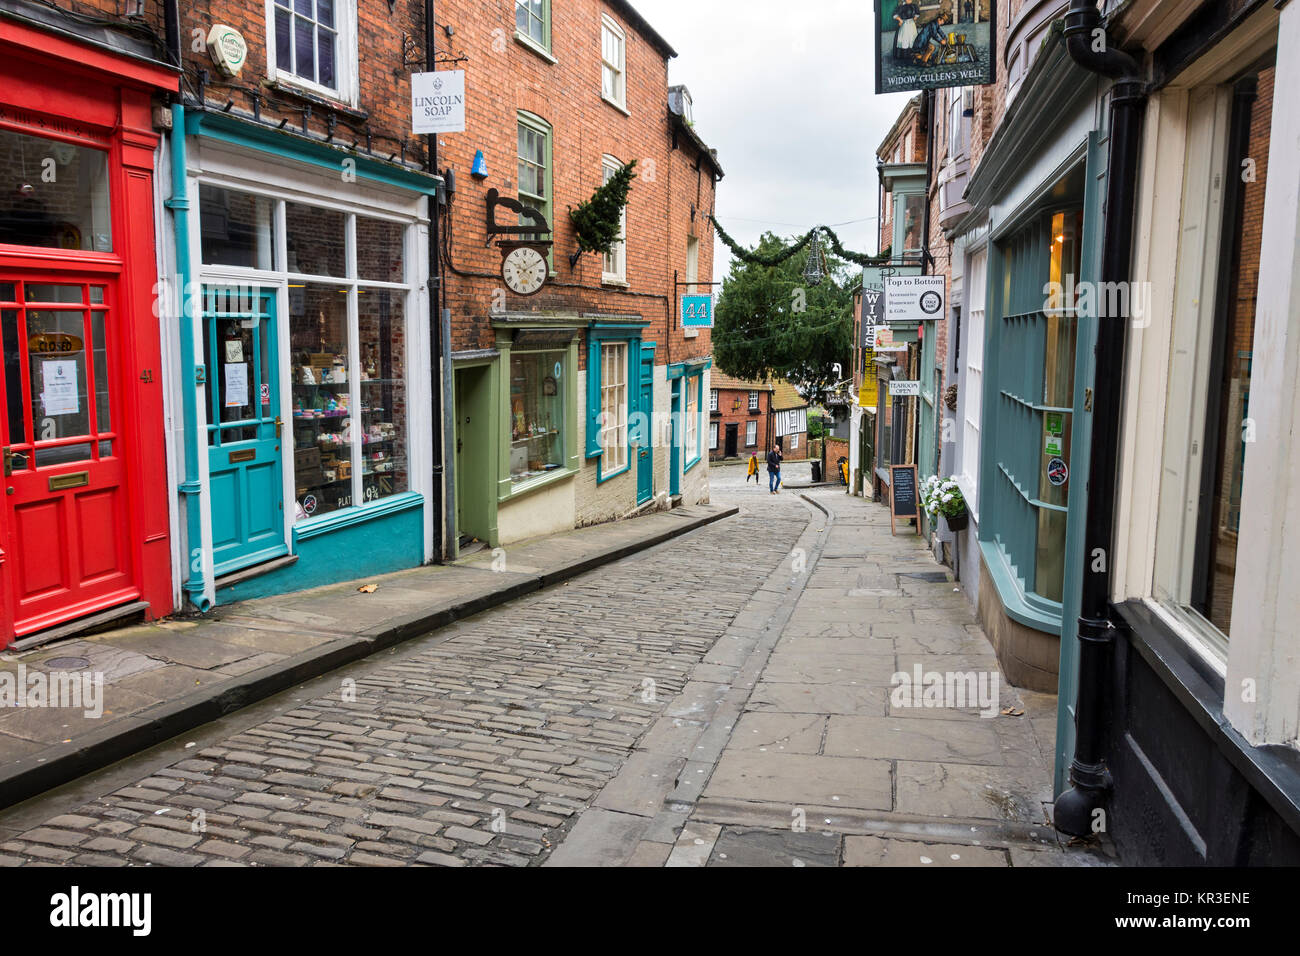 Looking down the street called 'Steep Hill', Lincoln, England, UK Stock Photo